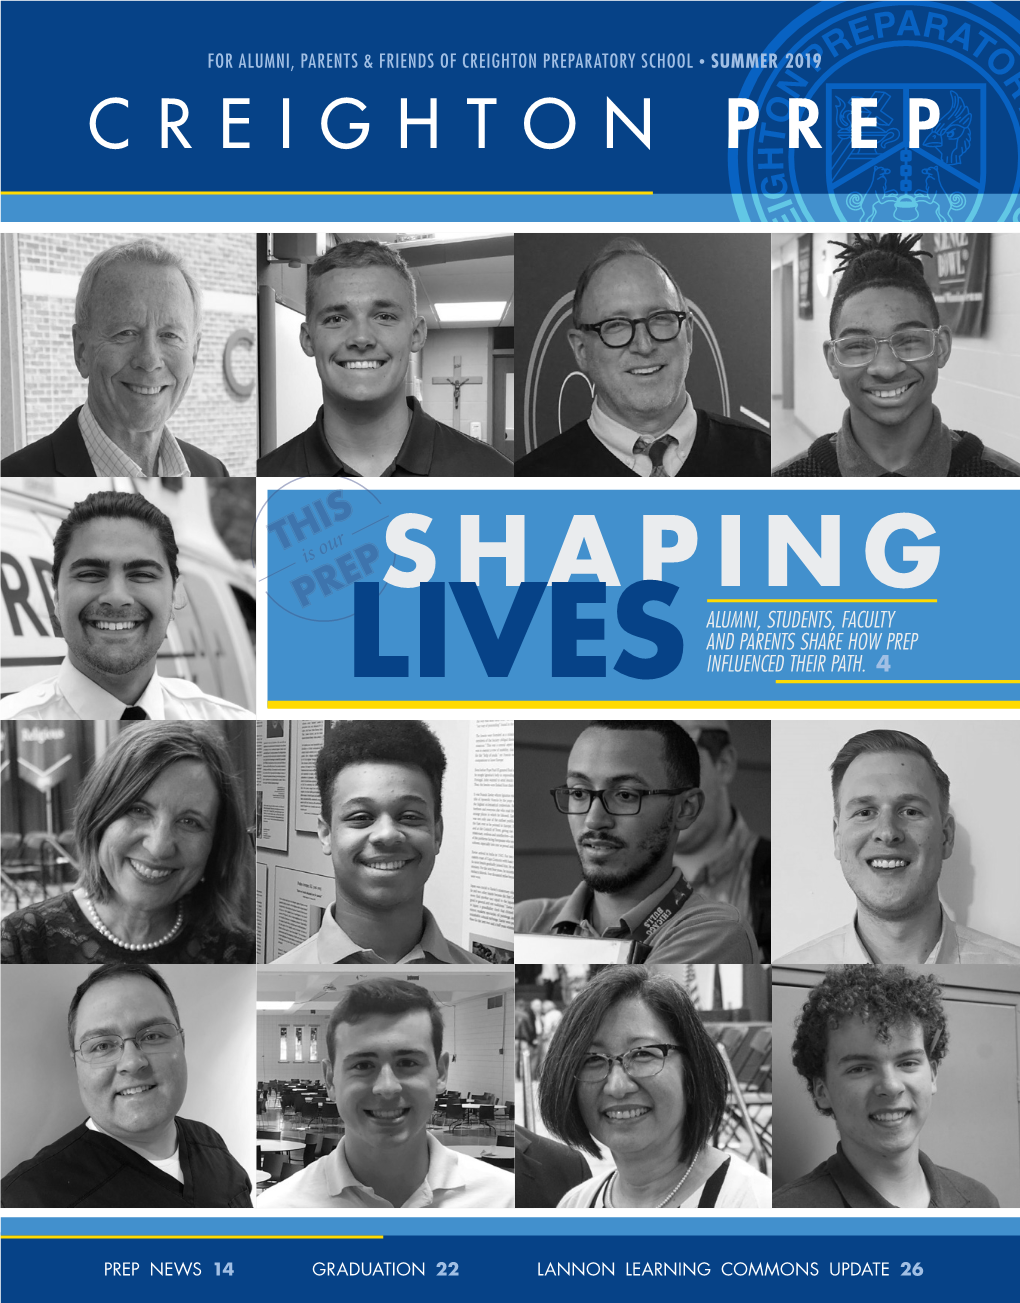 Shaping Alumni, Students, Faculty and Parents Share How Prep Lives Influenced Their Path